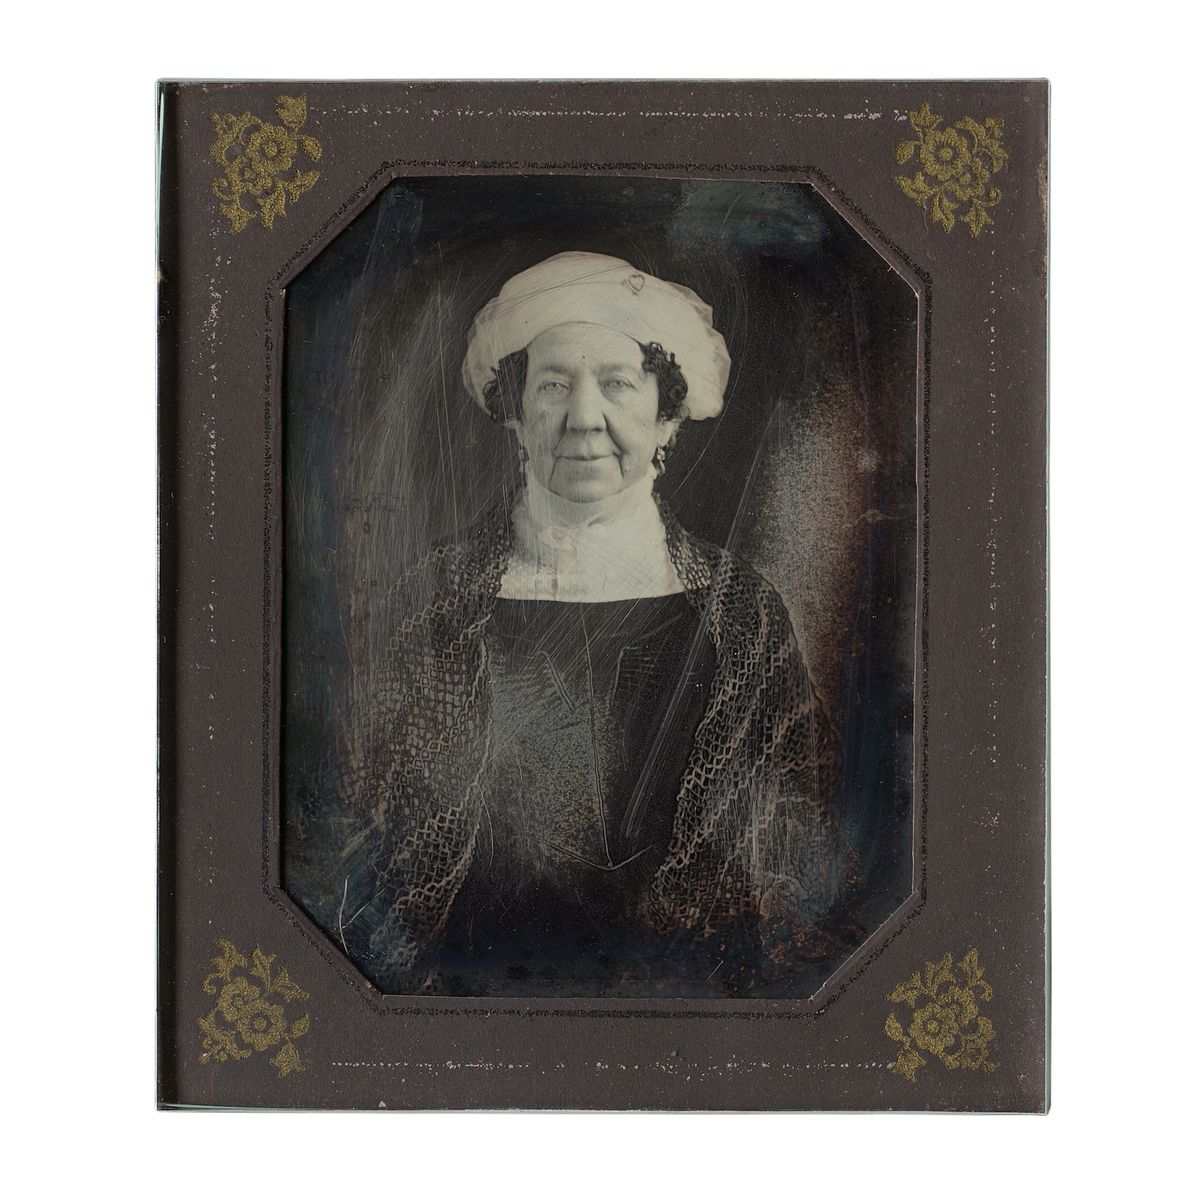 The Dolley Madison daguerreotype by John Plumbe Jr. from around 1846 National Portrait Gallery